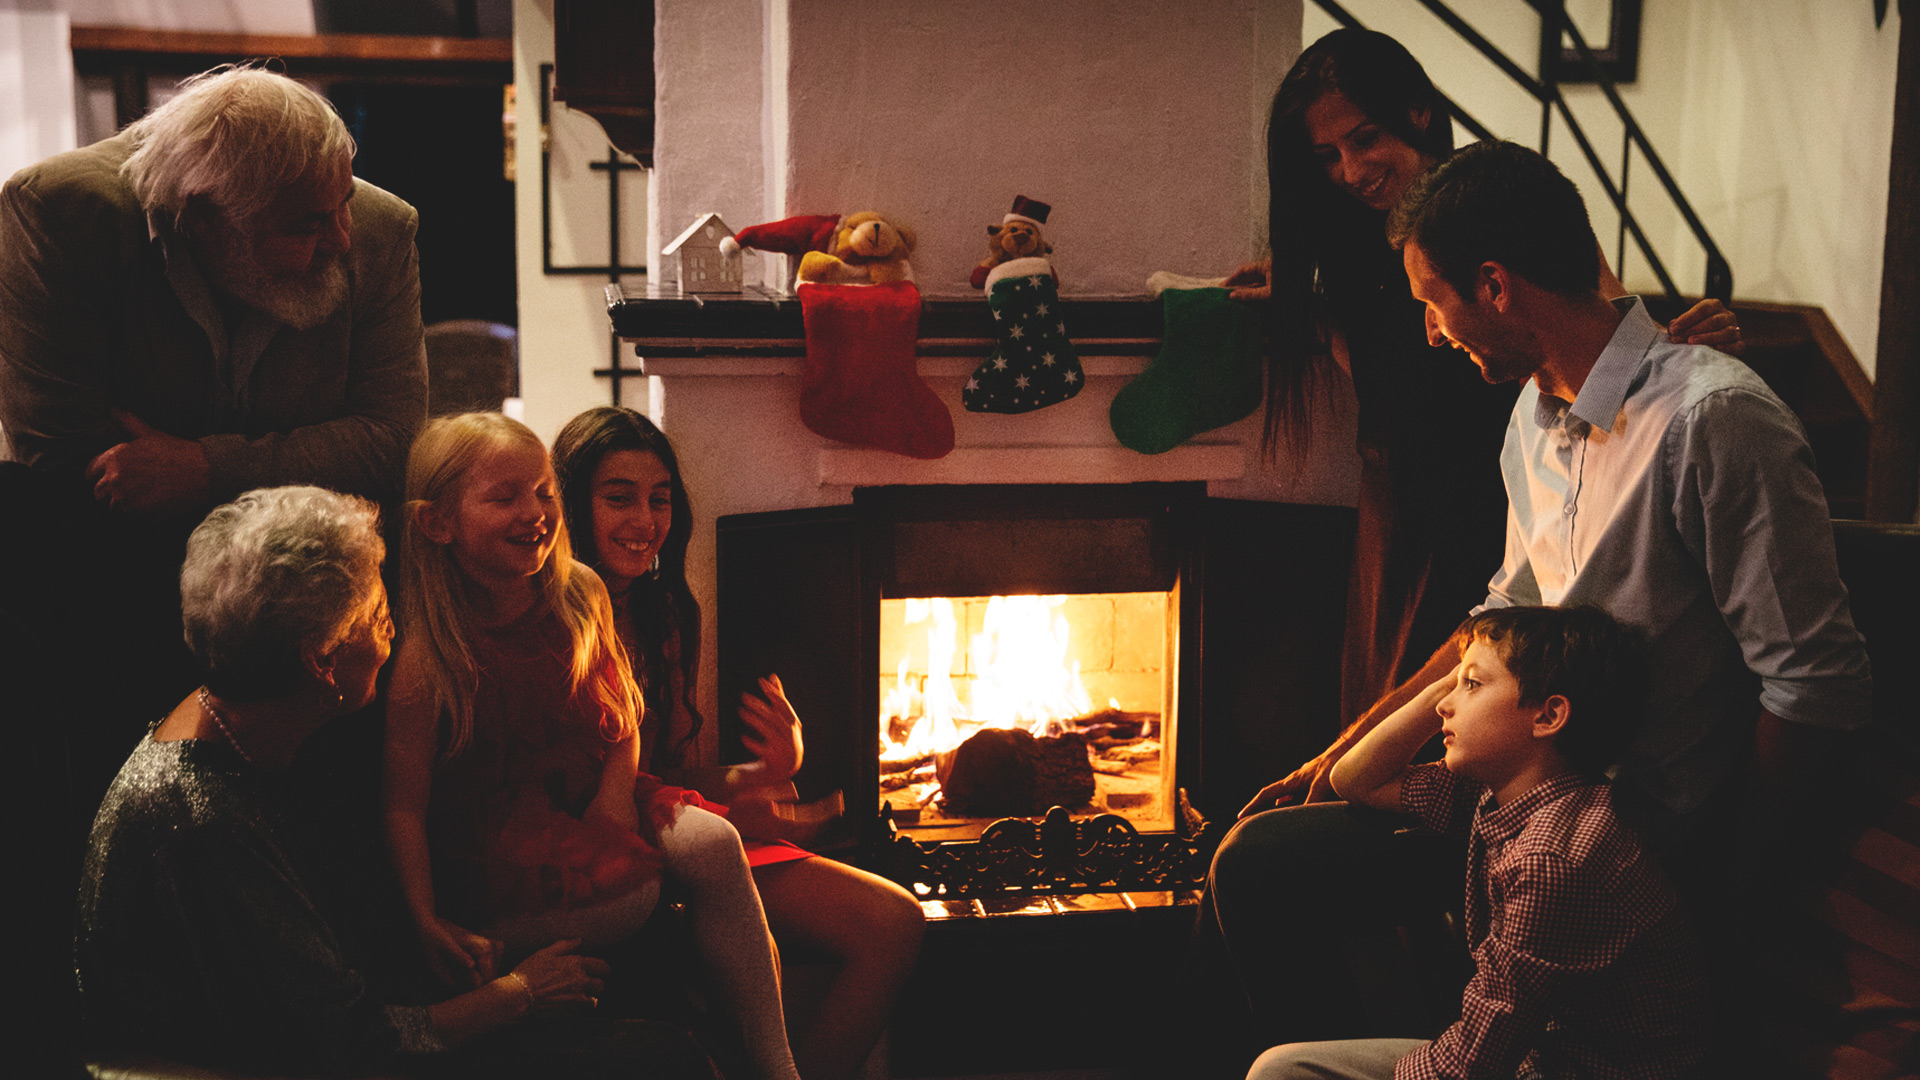 Family gathered at the fireplace at Christmas time